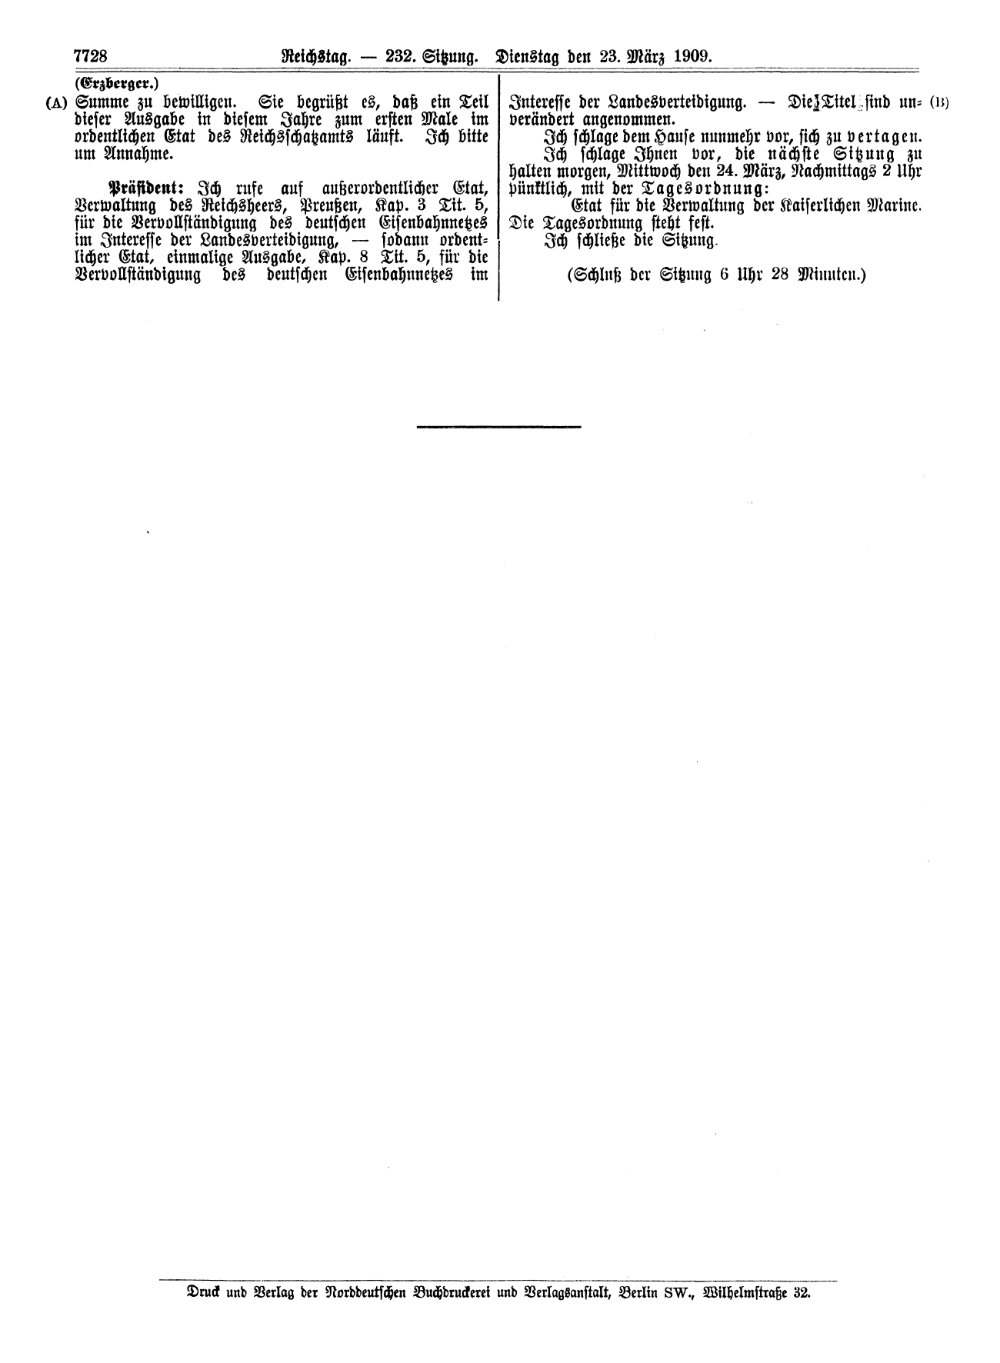 Scan of page 7728